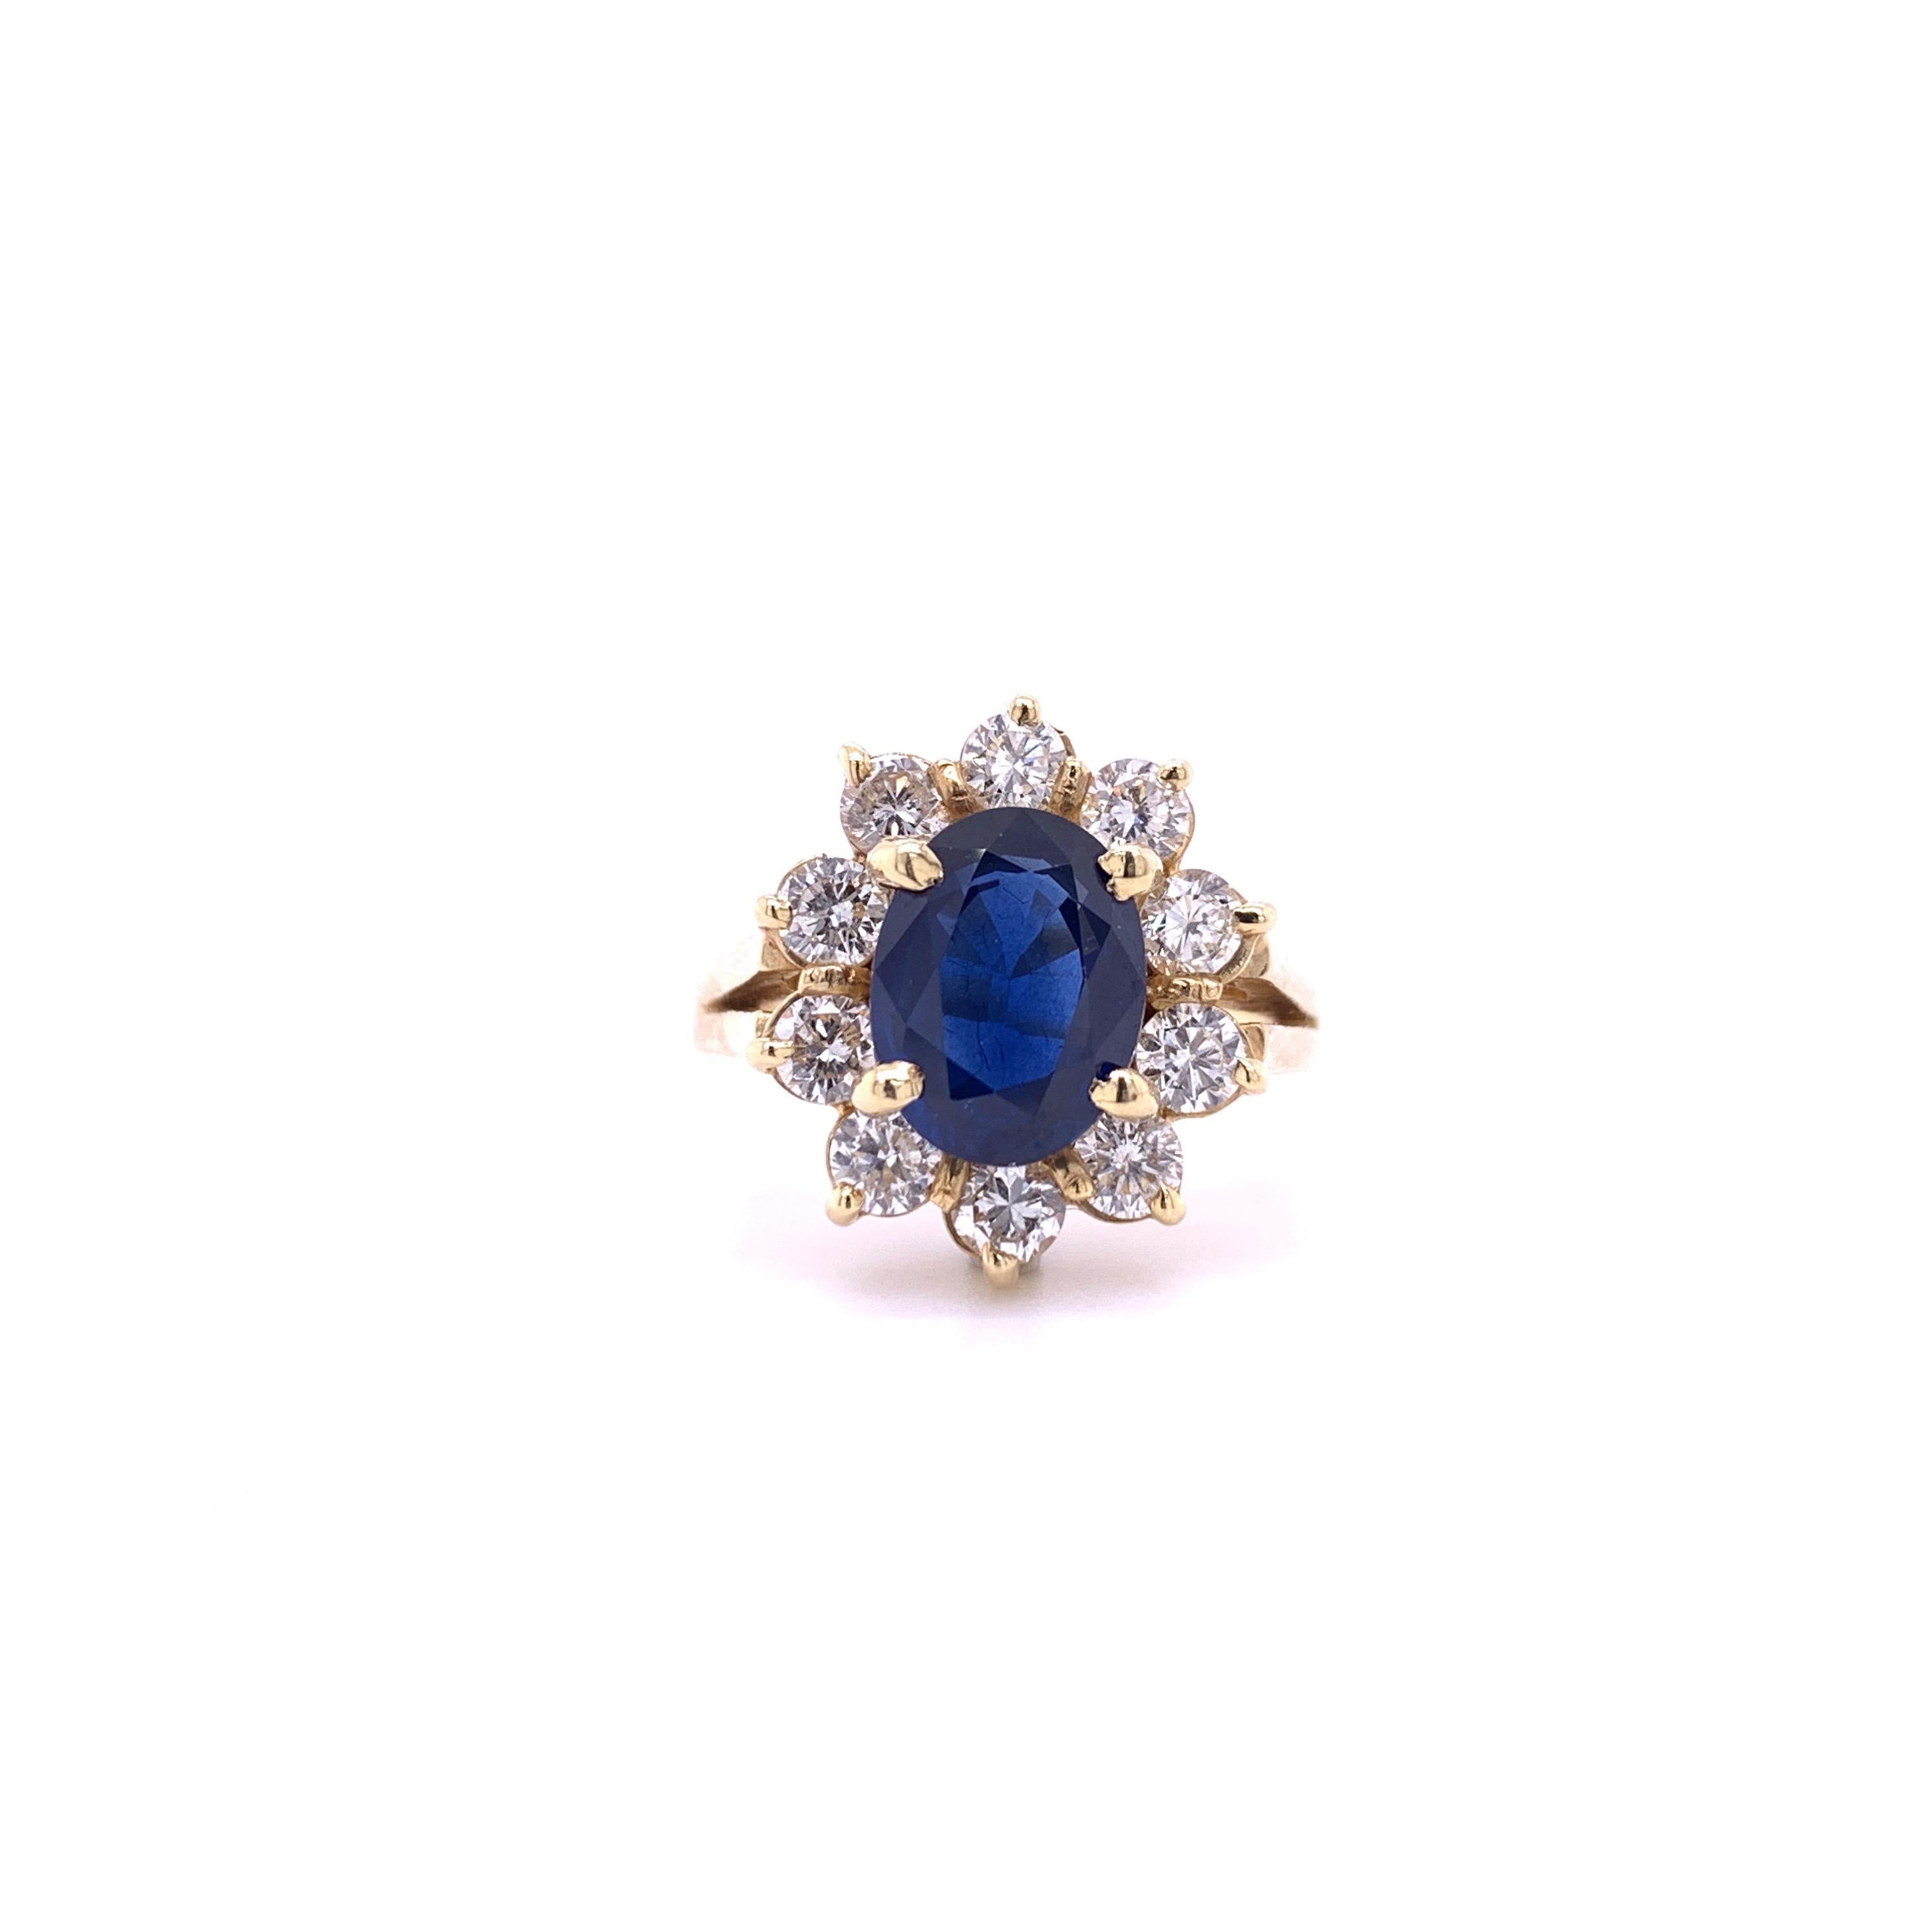 Classic royal design sapphire diamond ring. Dark indigo blue, oval faceted natural sapphire mounted in an open basket with four prongs, accented with round brilliant cut diamonds in a flower design. Contemporary handcrafted design set in high polish